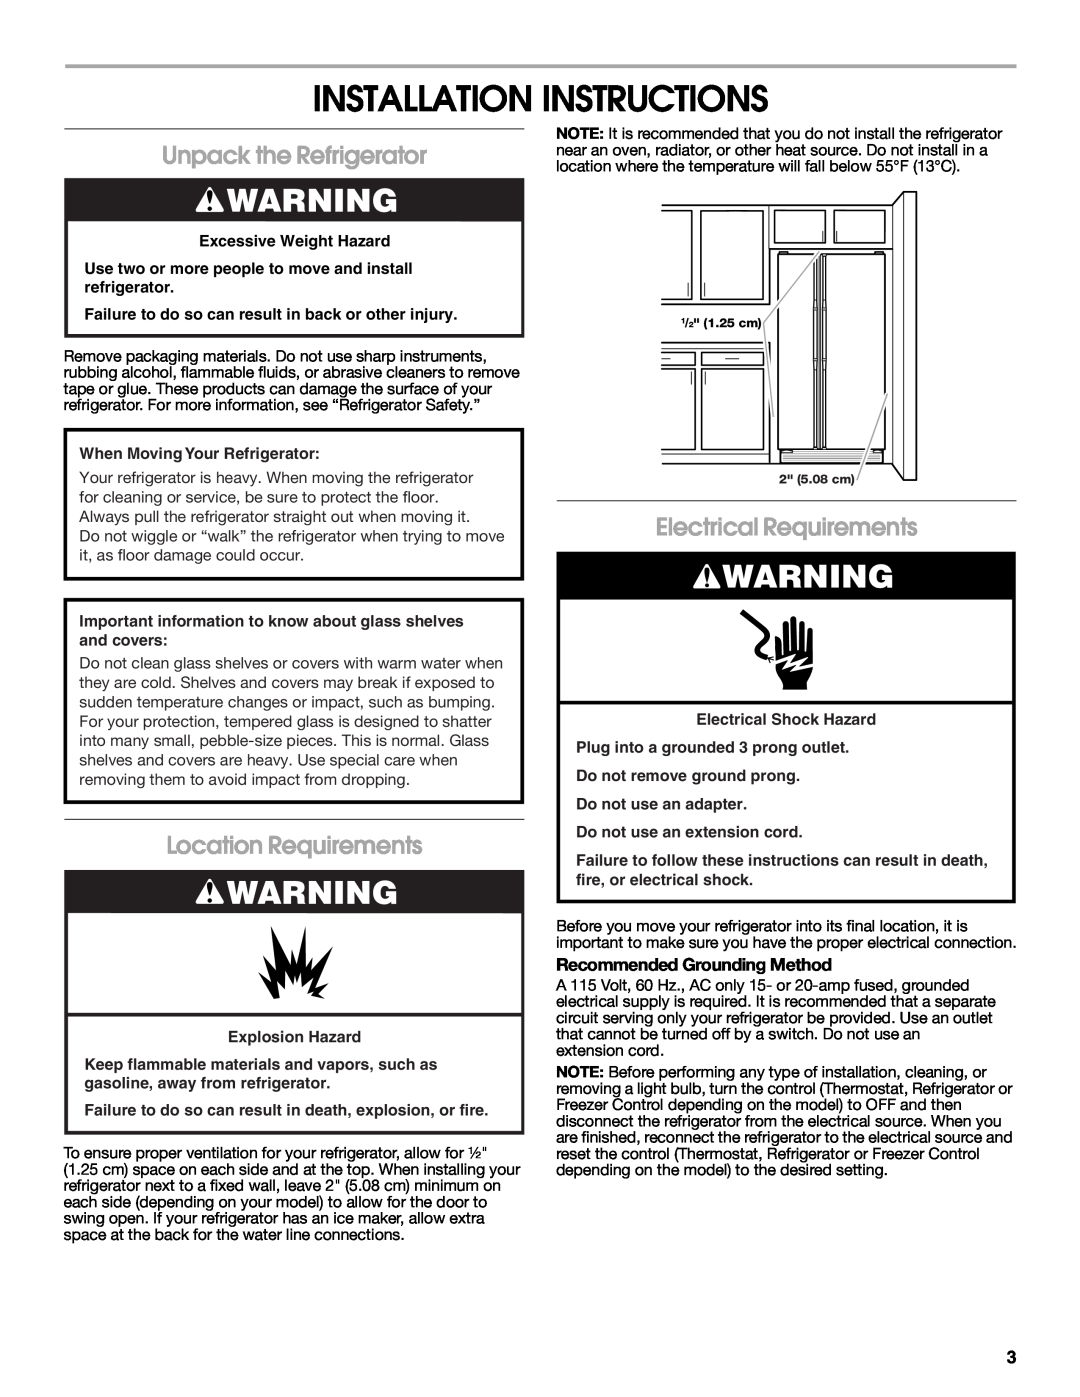 Whirlpool RS22AQXKQ00 Installation Instructions, Unpack the Refrigerator, Location Requirements, Electrical Requirements 